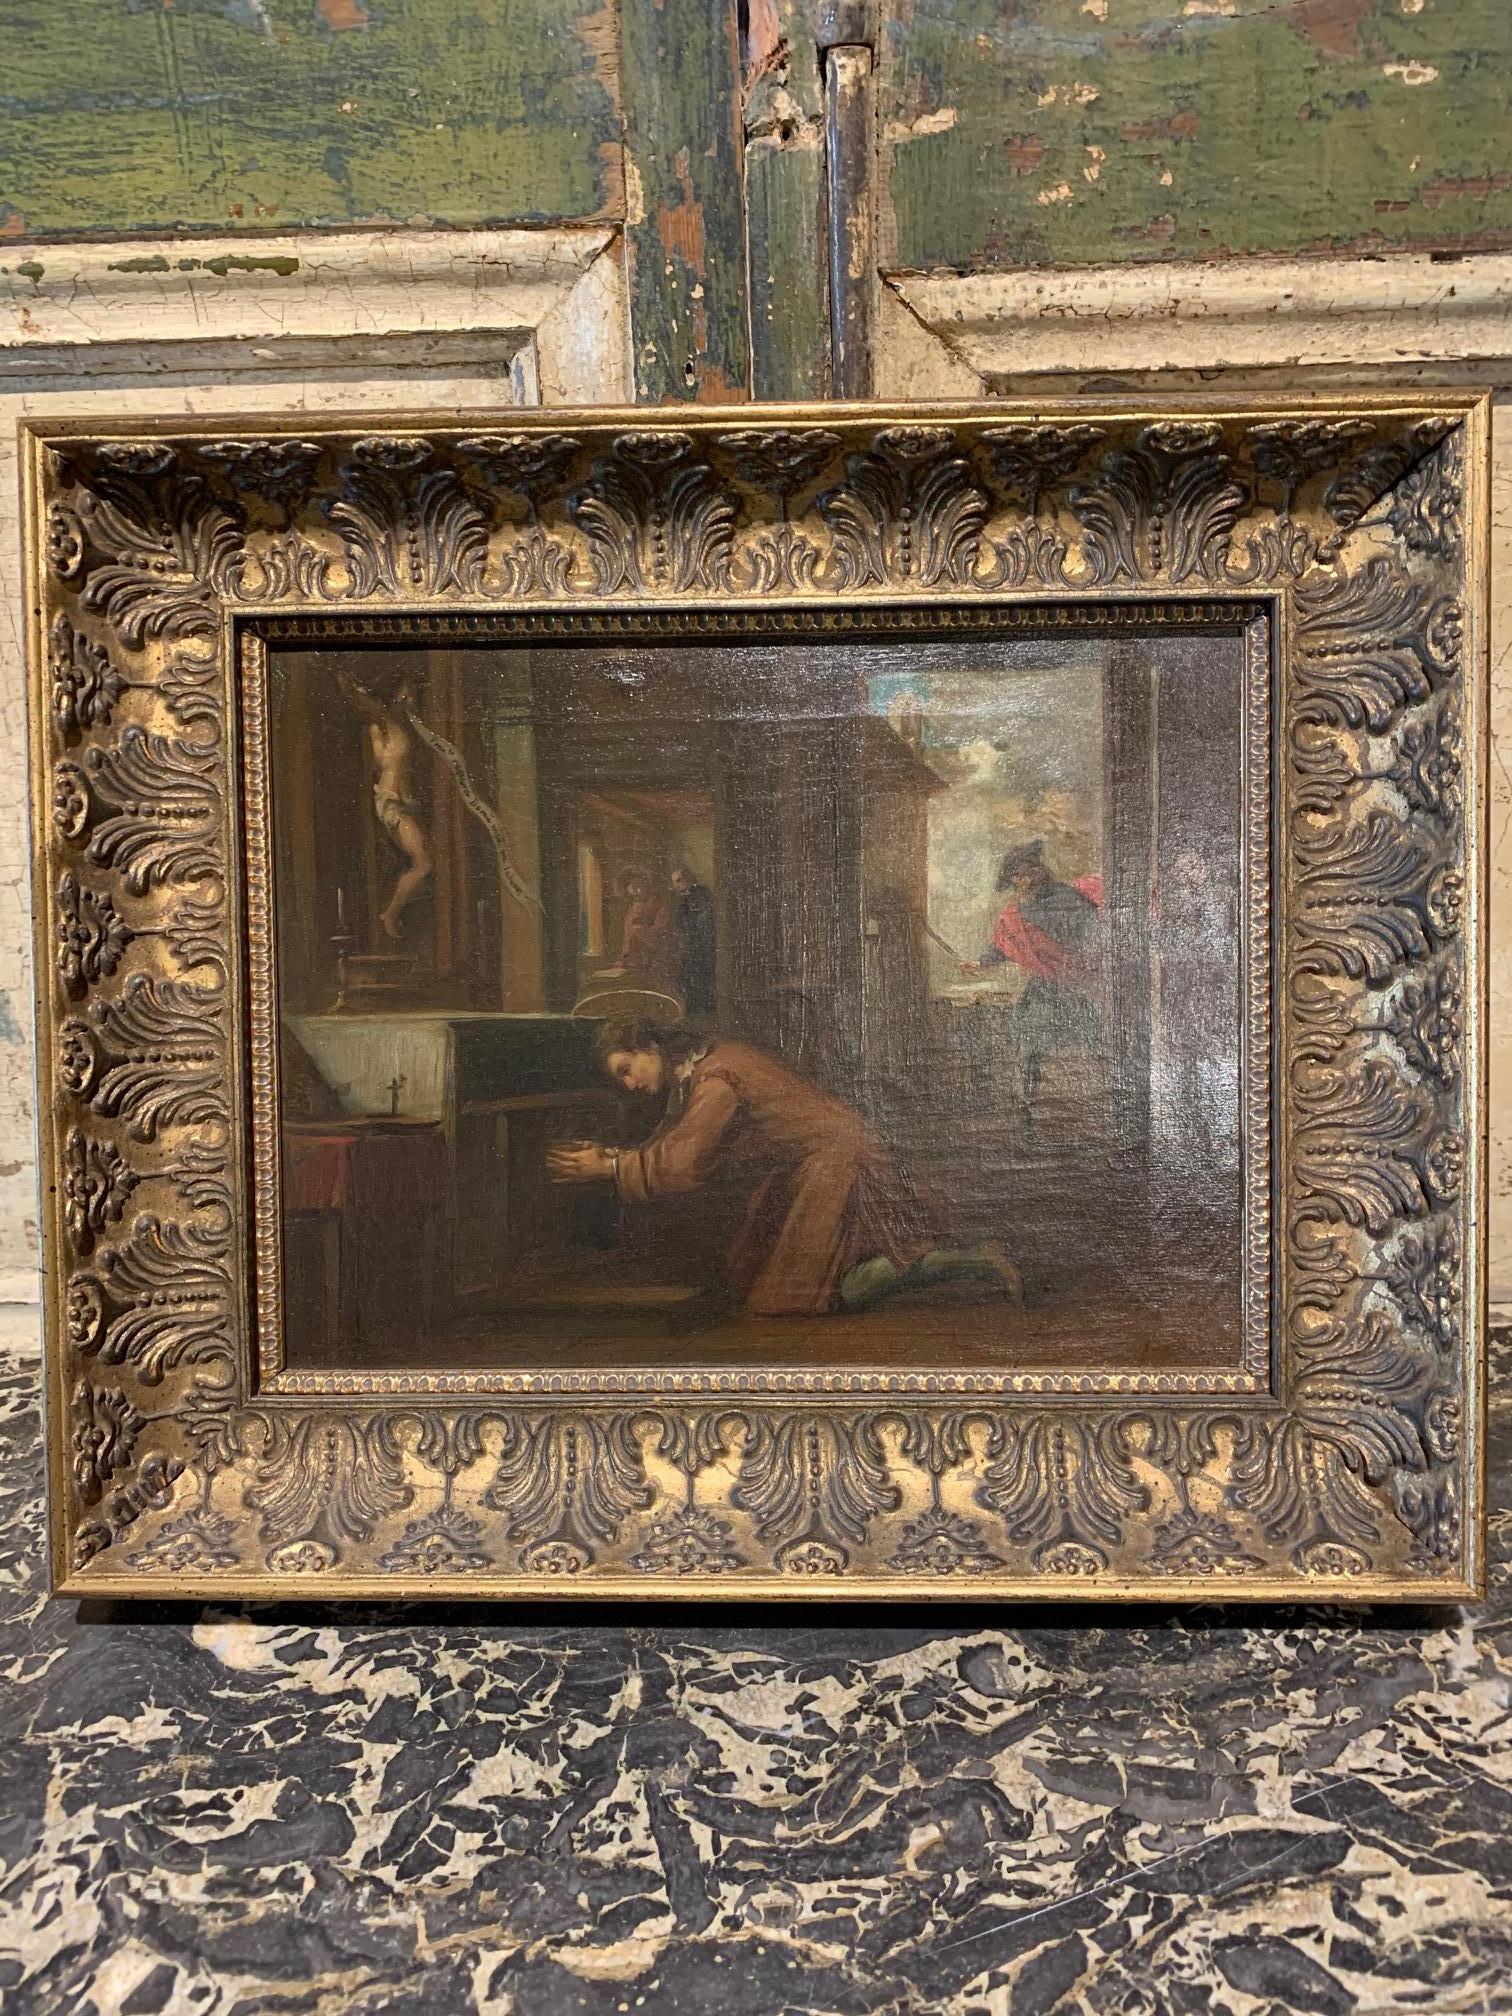 A very beautiful mid-19th century oil-on-canvas painting of a young Saint Francis praying at an altar, circa 1860. The artist is Juaquin Vayreda (1843-1894). This painting is a copy of a composition by the Catalan painter Antoni Viladomat, from the